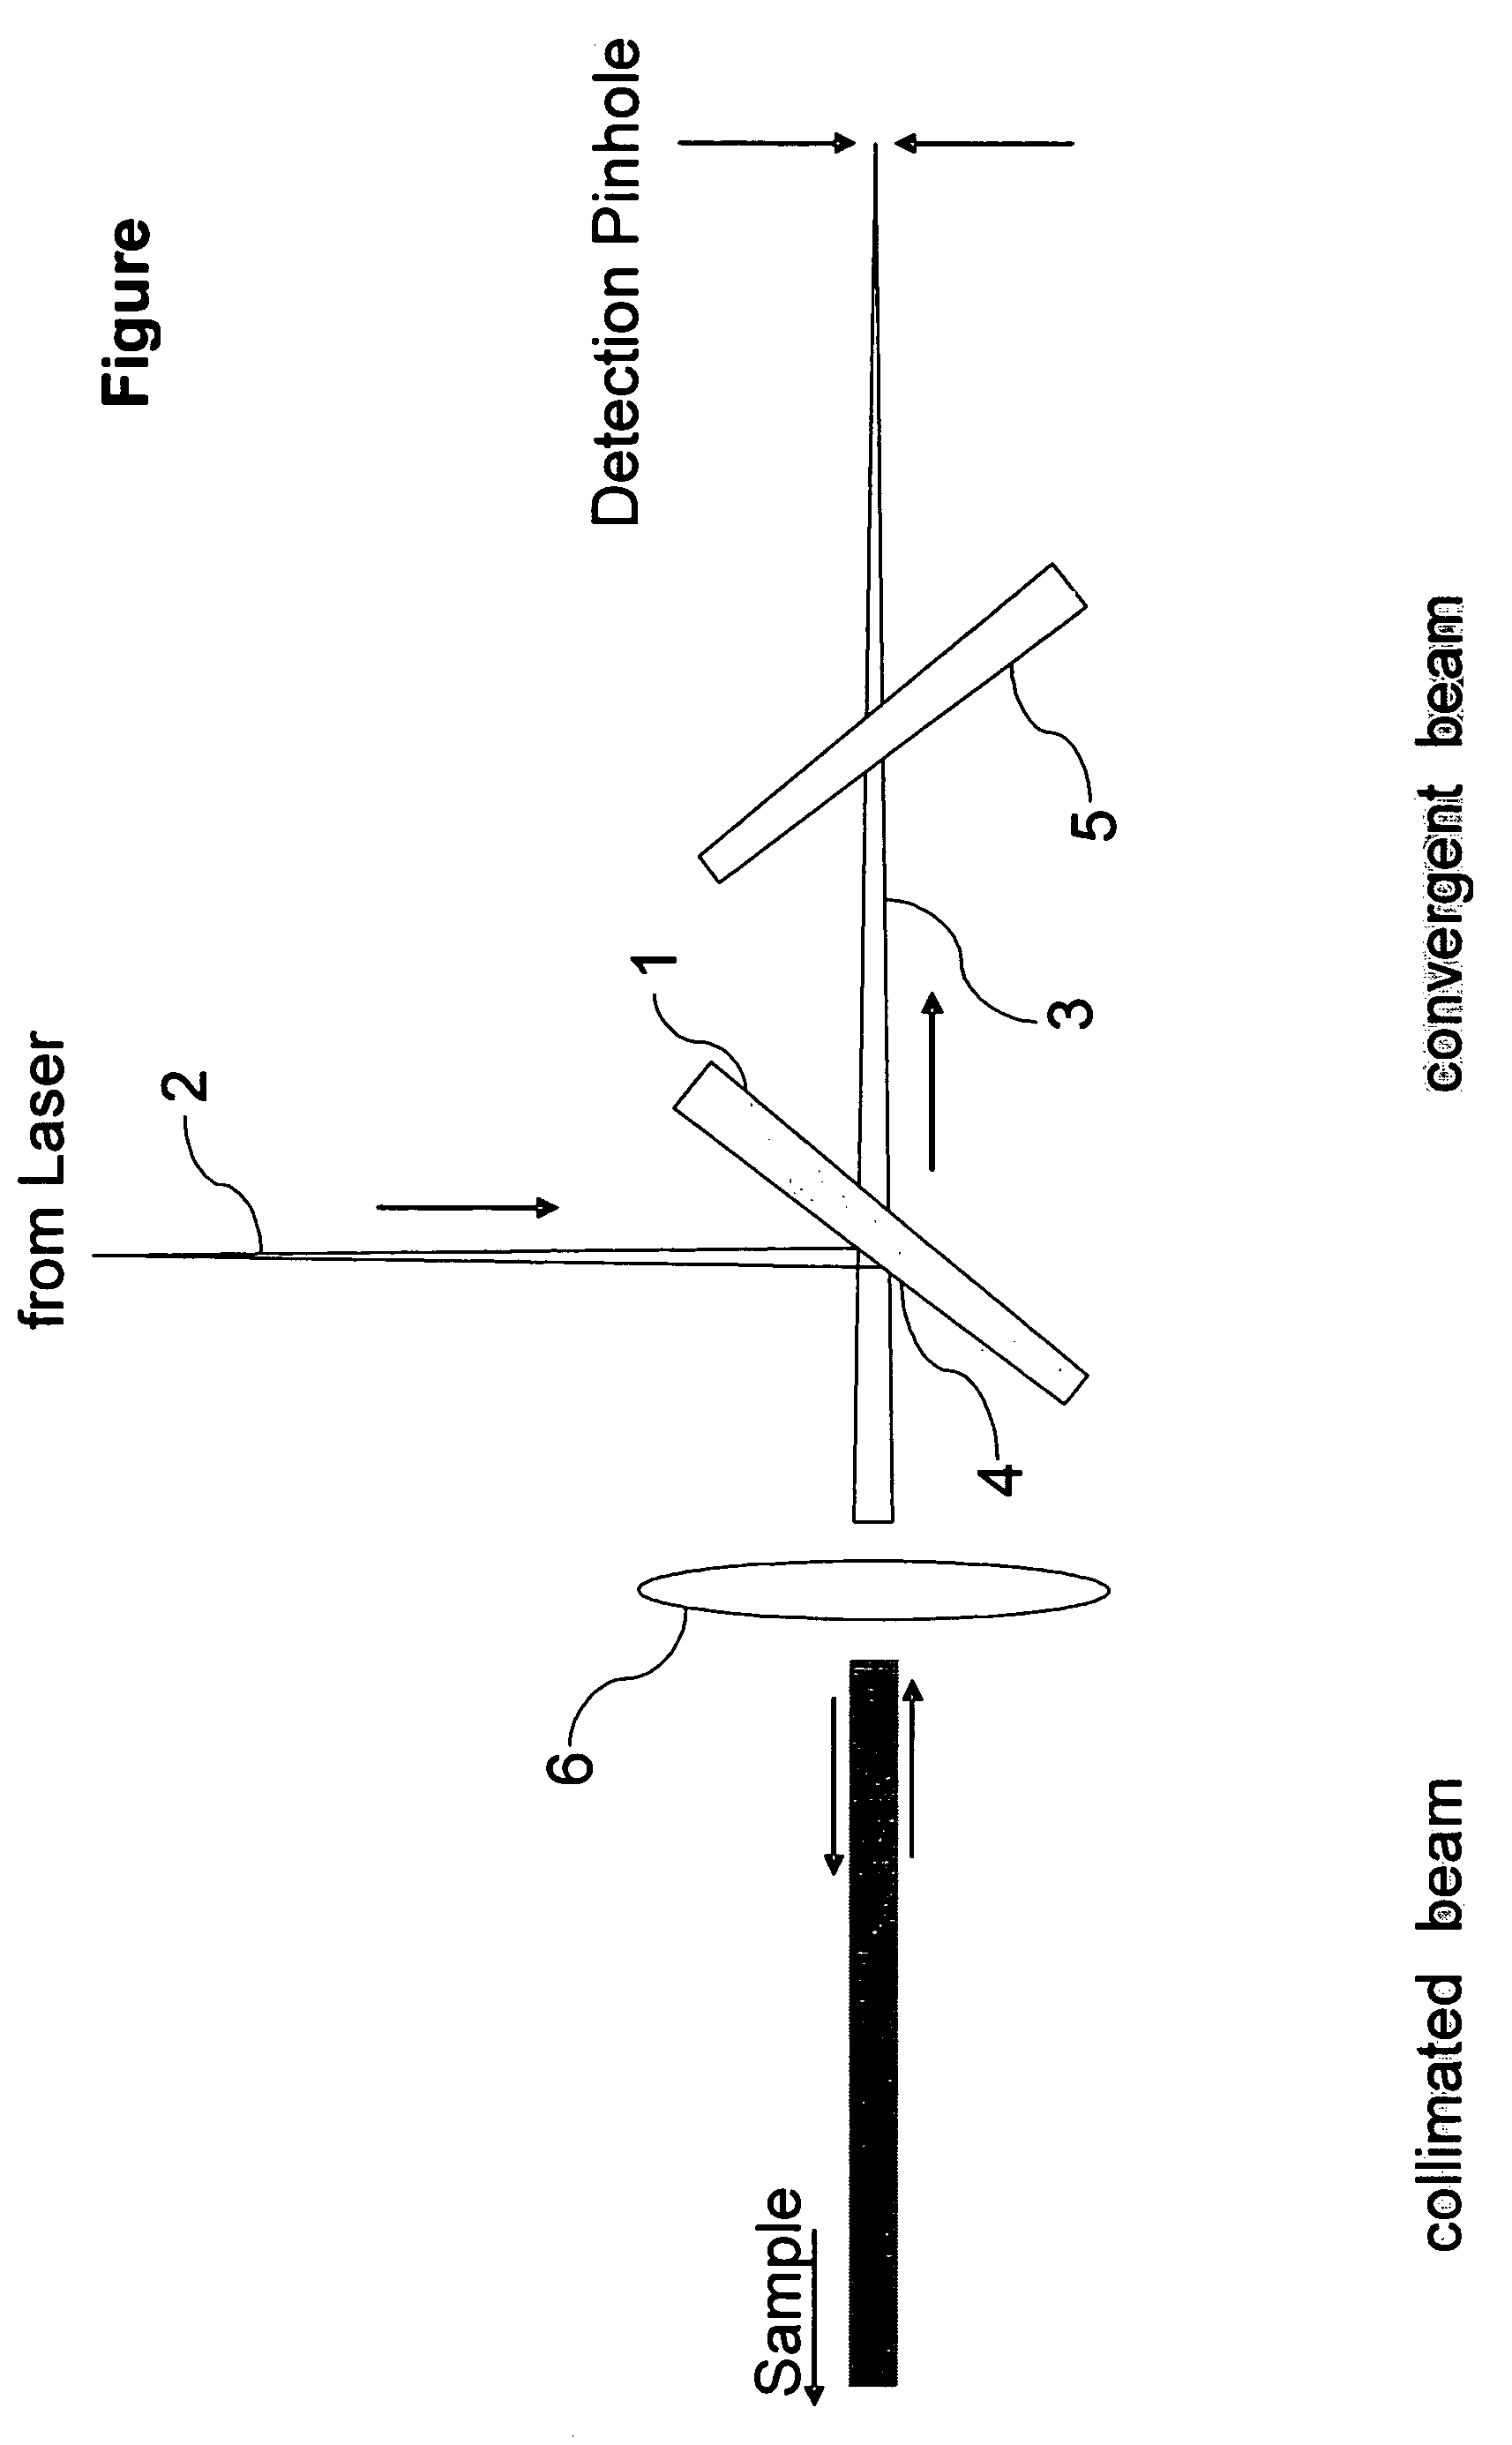 Optical arrangement for microscope and microscope